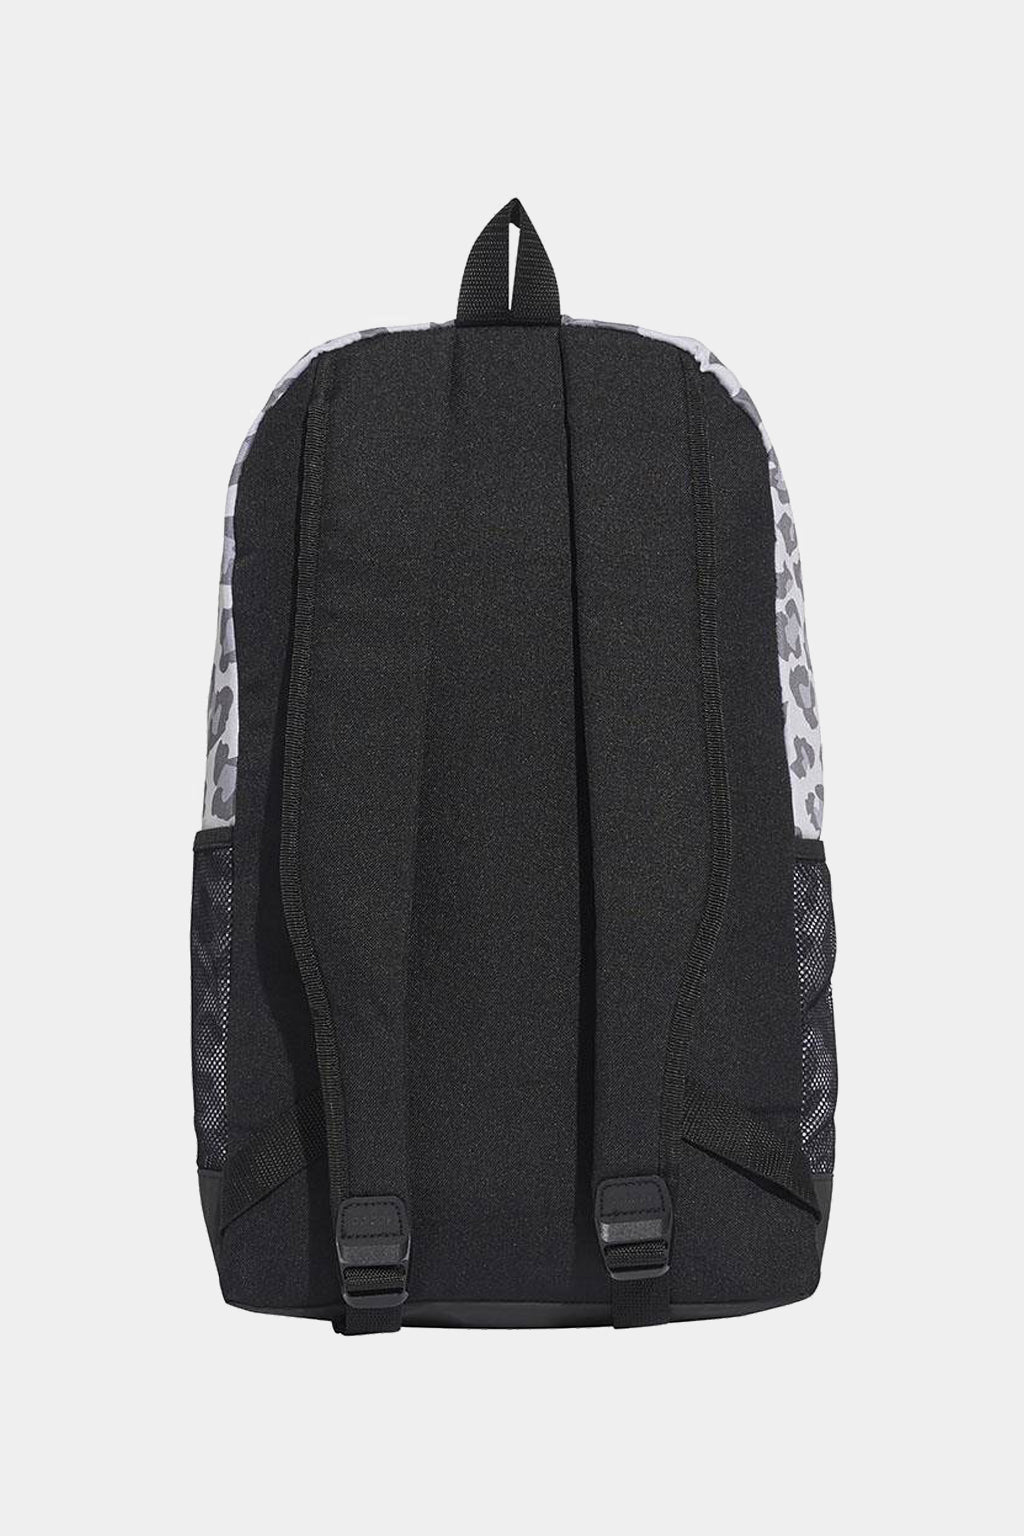 Adidas - Linear Backpack Leopard